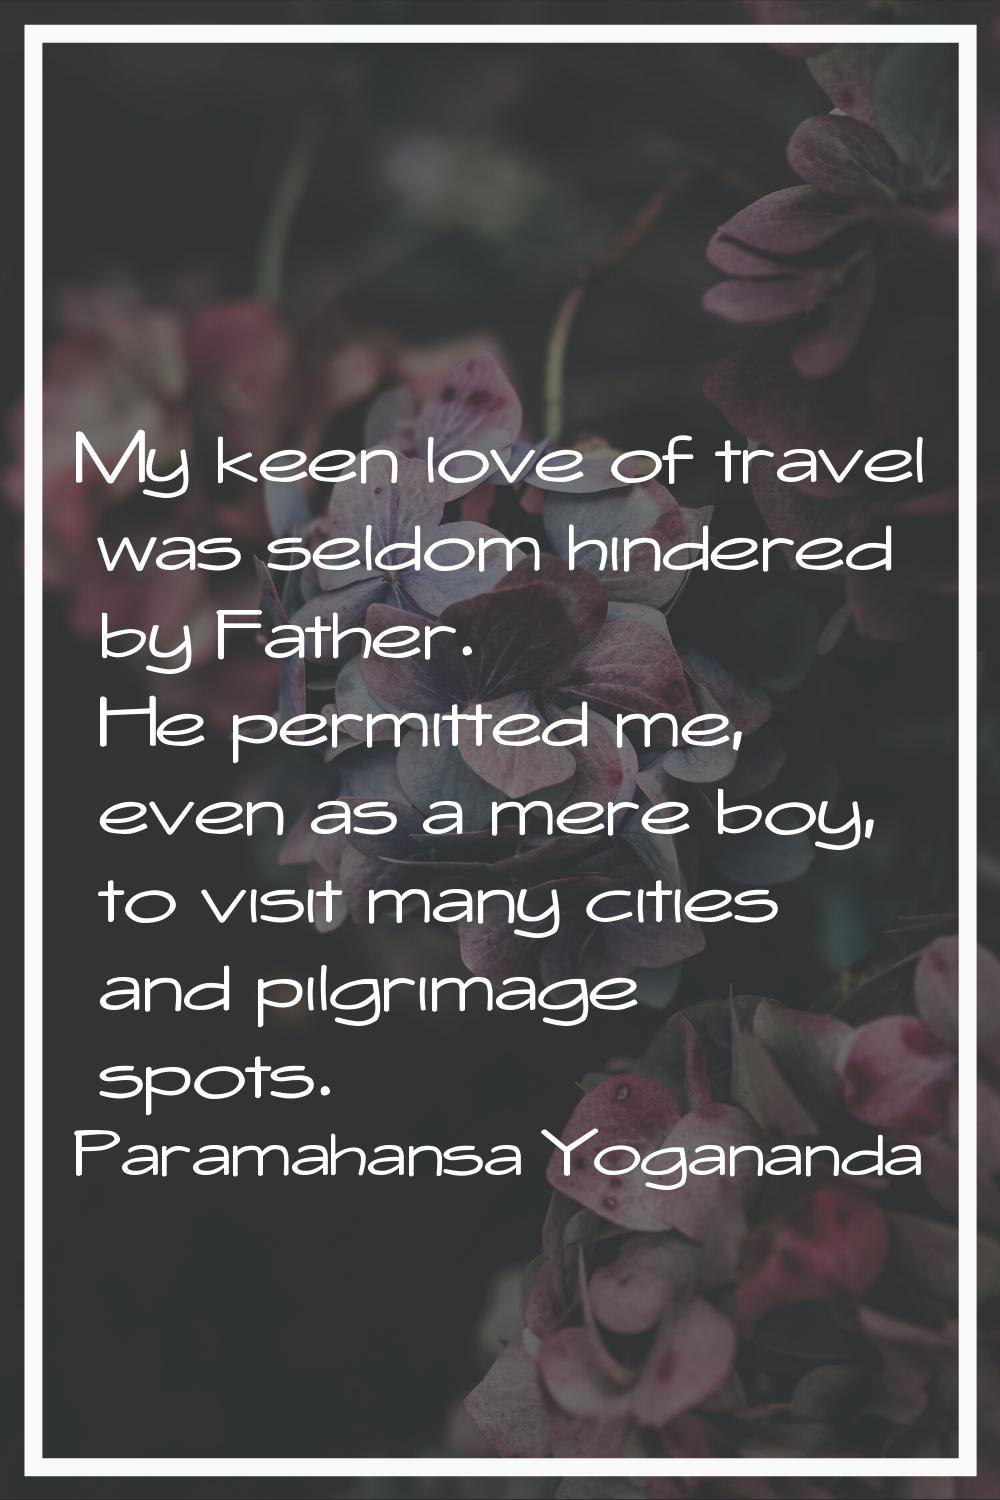 My keen love of travel was seldom hindered by Father. He permitted me, even as a mere boy, to visit